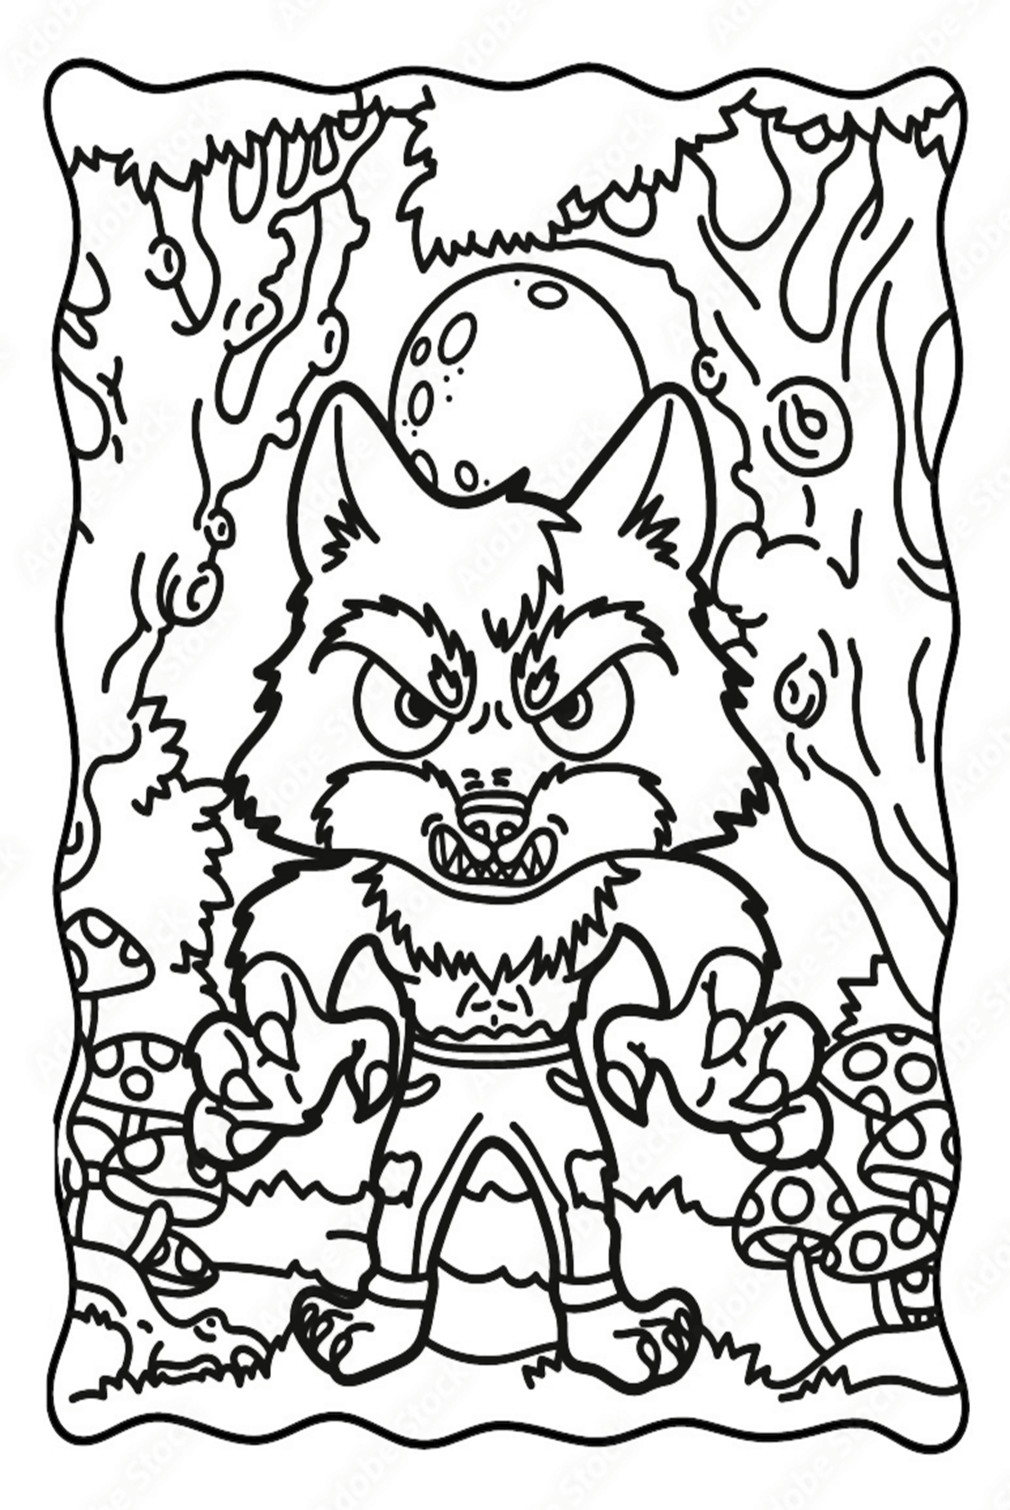 Cartoon Werewolf Coloring Page - Free Printable Coloring Pages